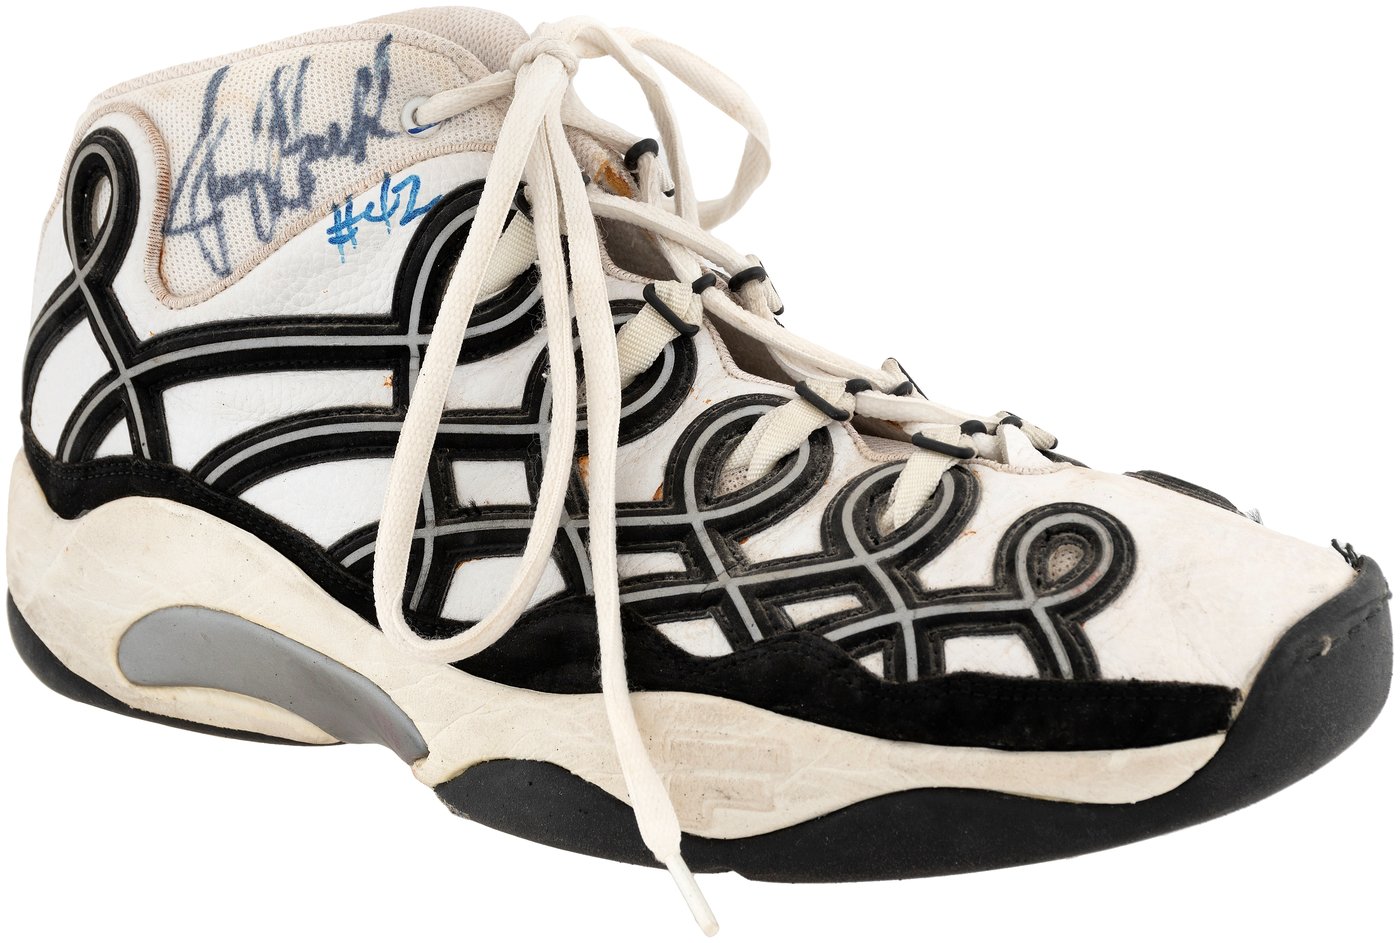 jerry stackhouse shoes